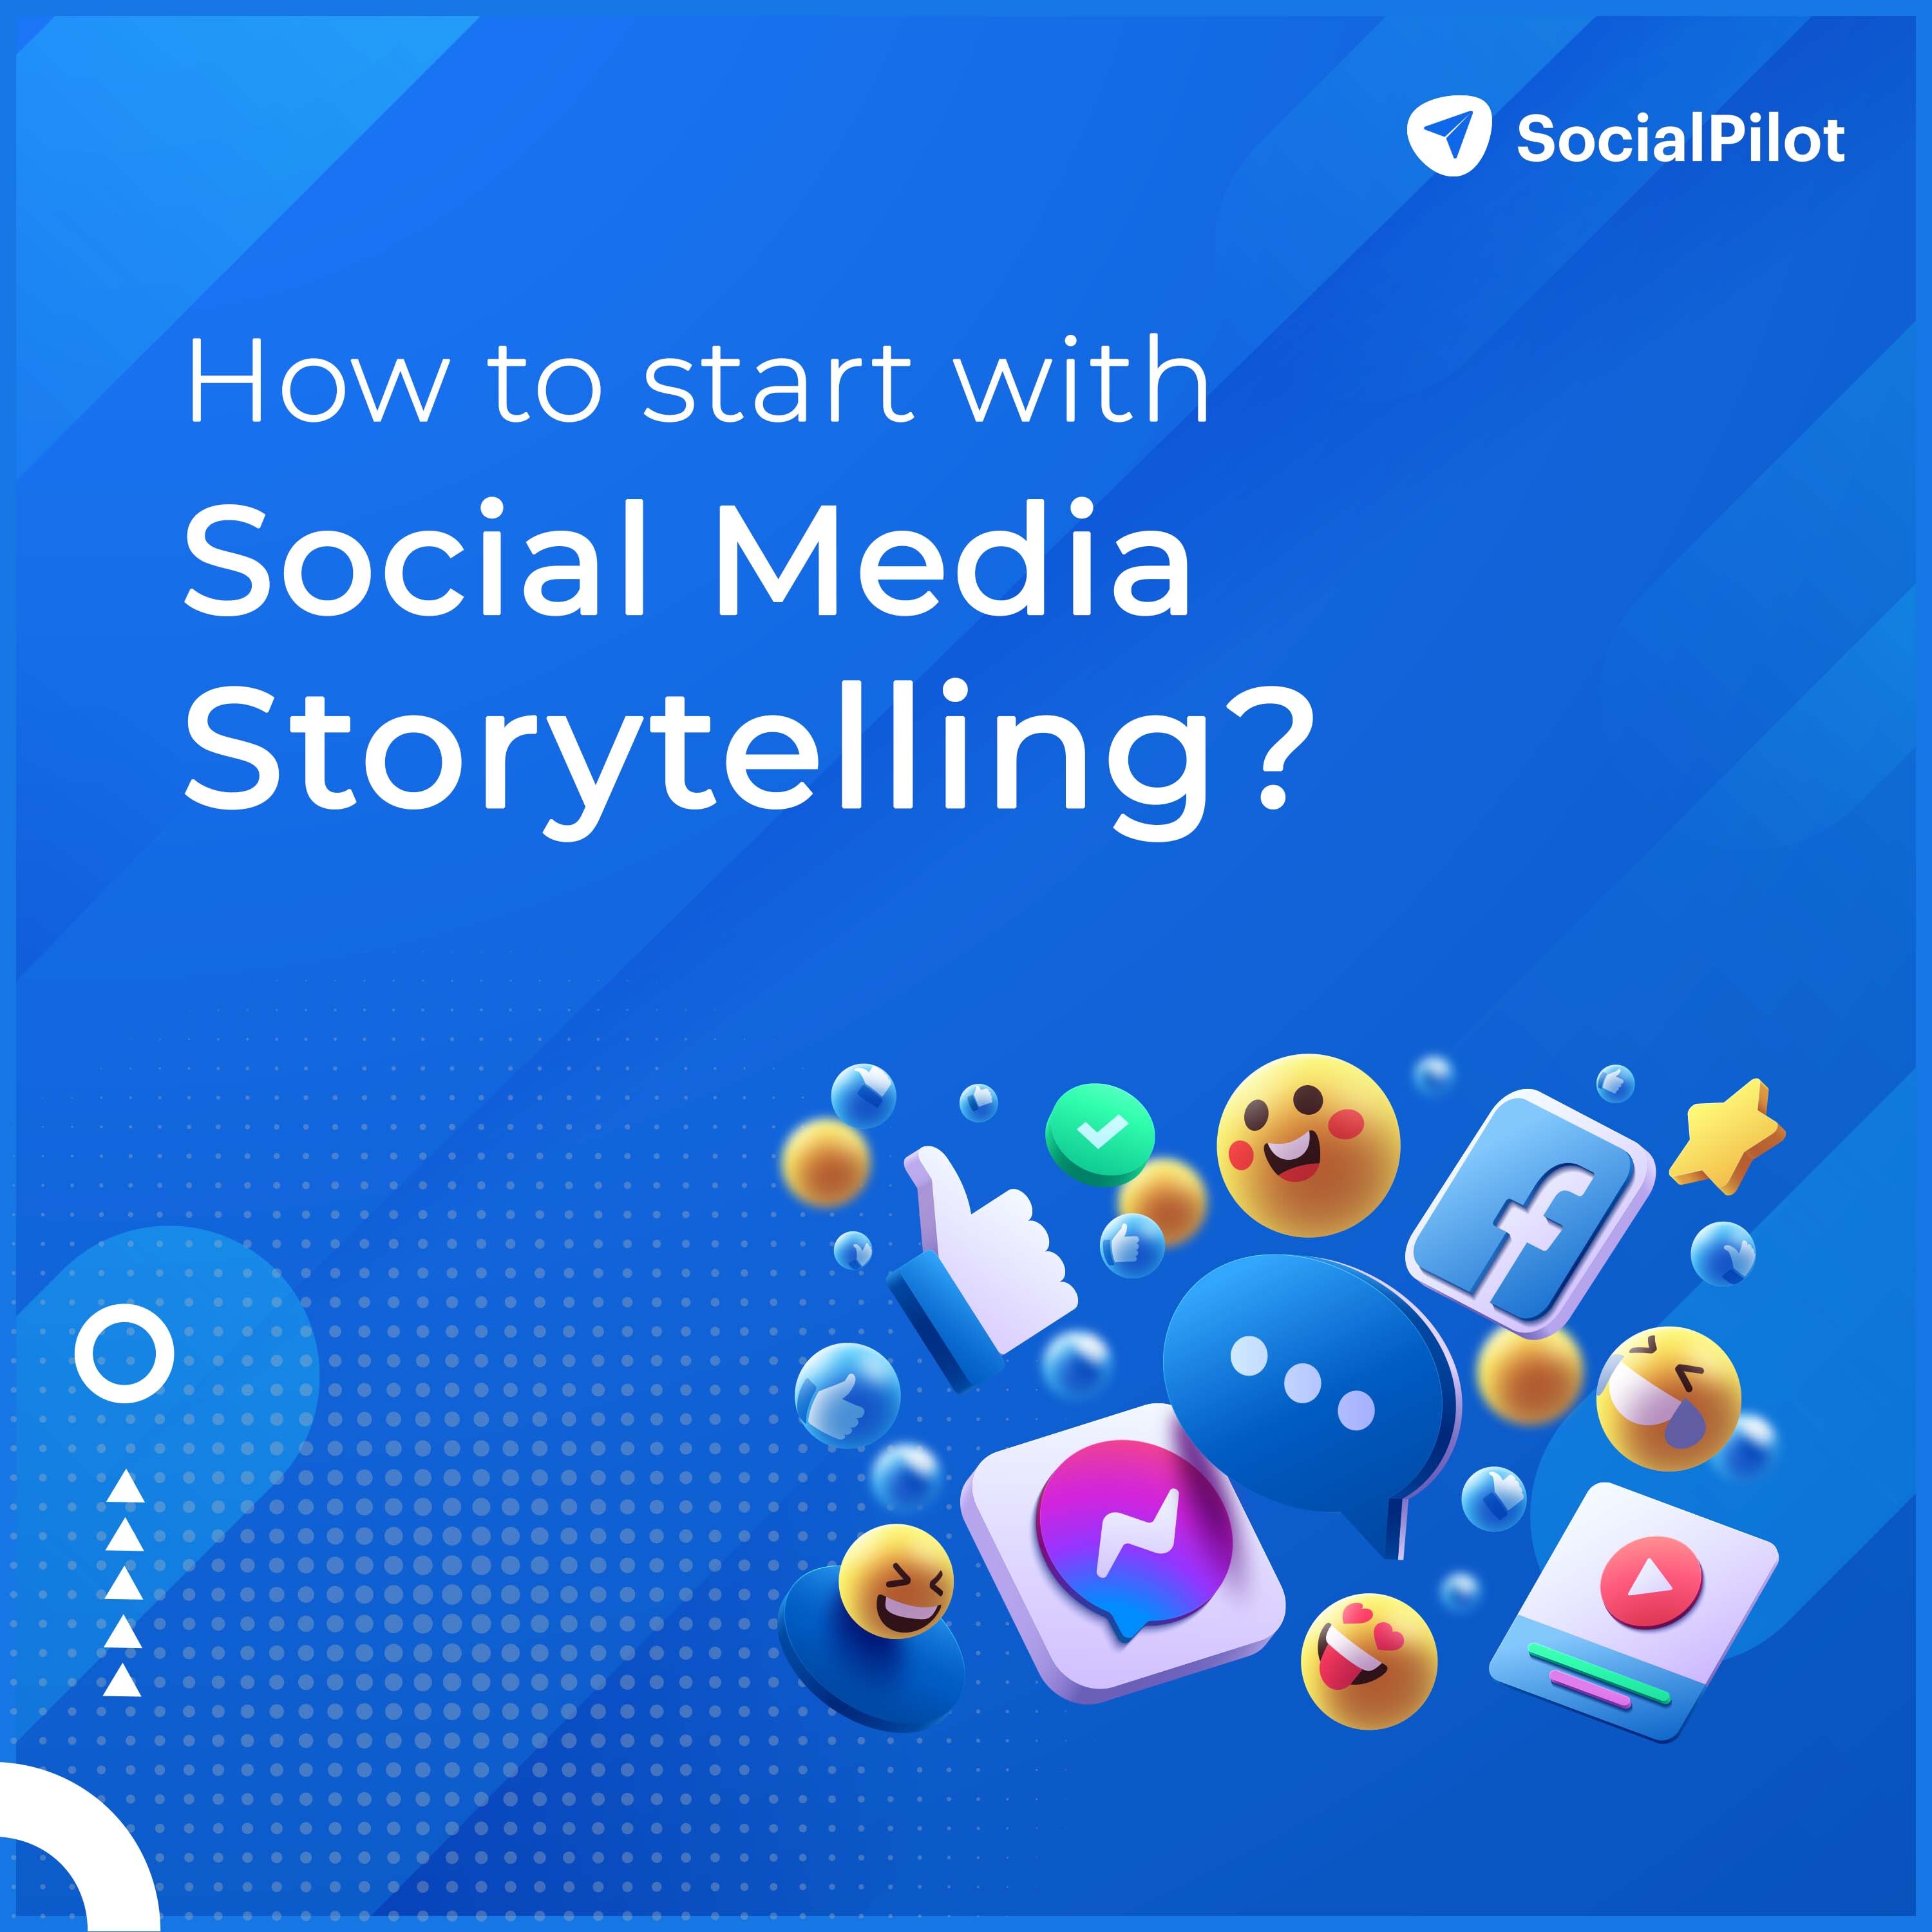 How to Get Started with Social Media Storytelling (3 Steps)